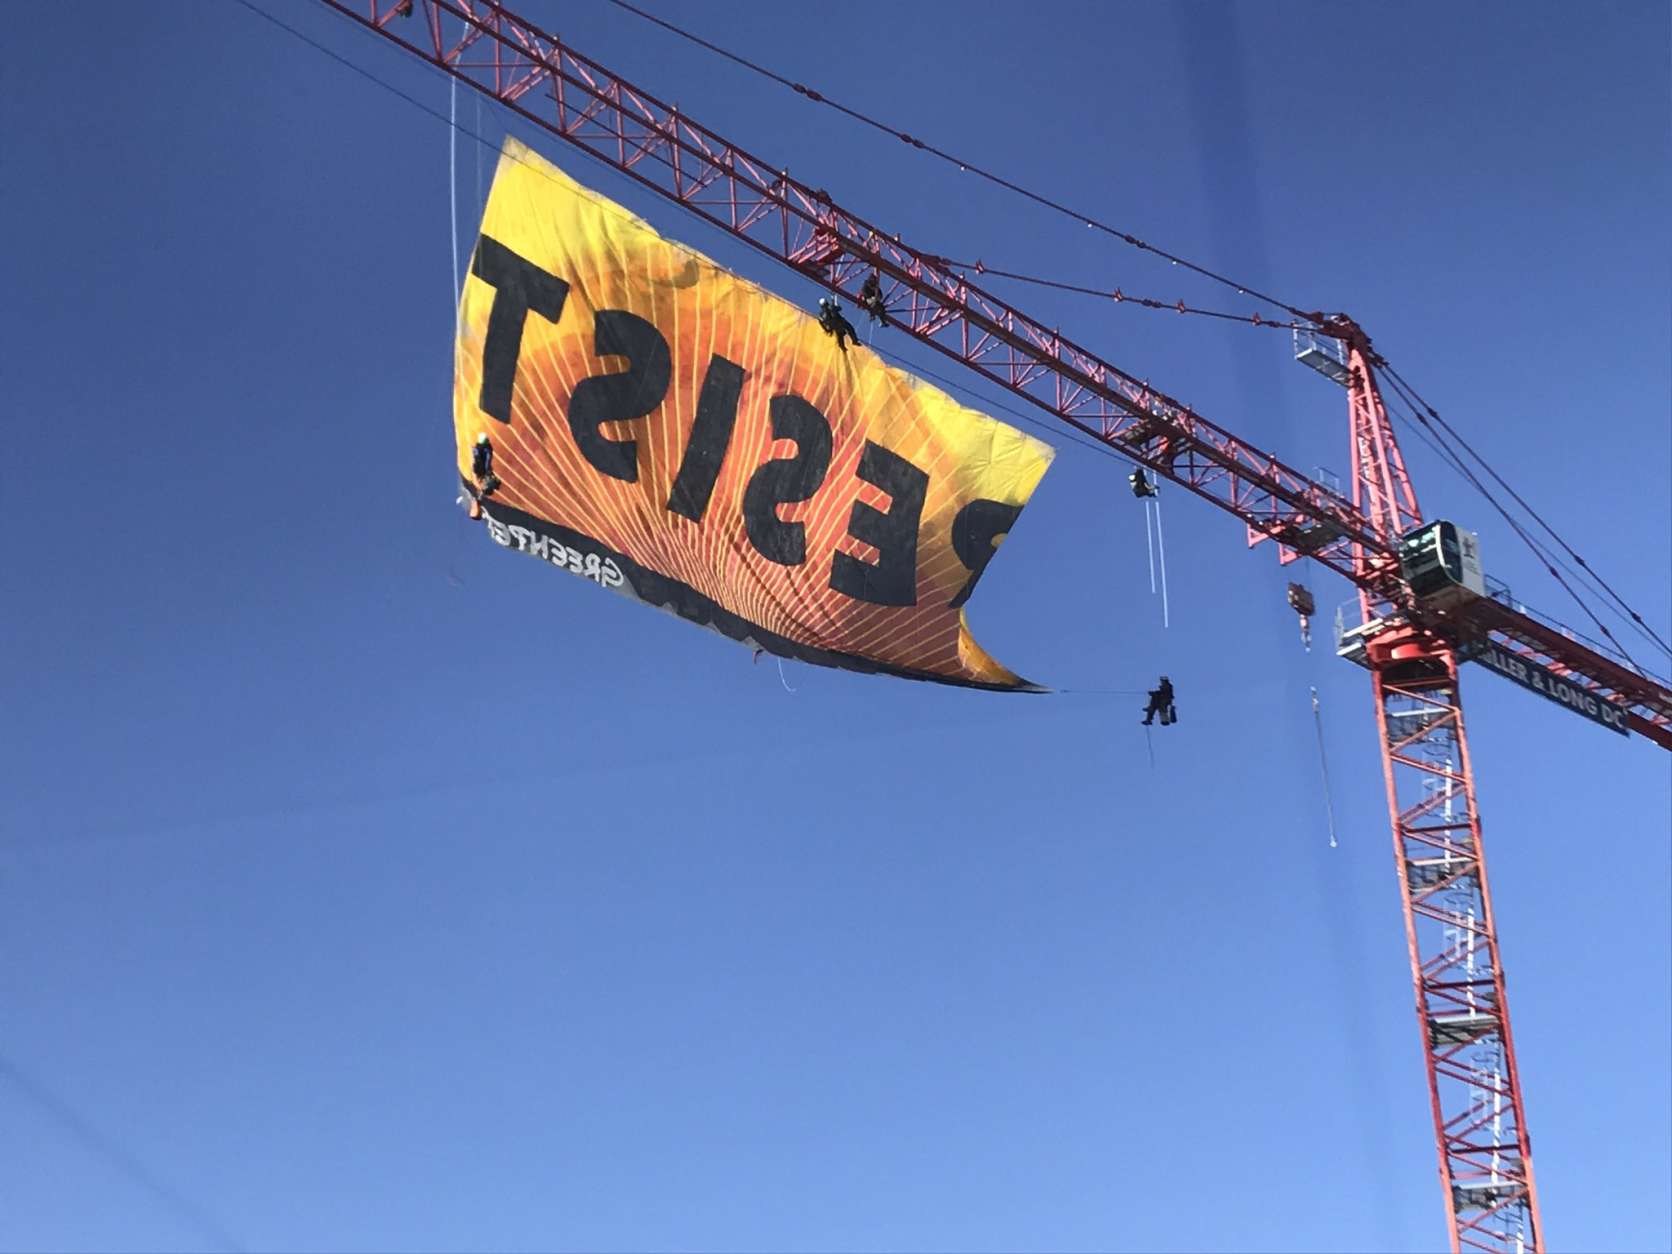 Protesters from Greenpeace unfurl a banner reading "Resist" on a construction crane in downtown D.C. Wednesday morning. (WTOP/Neal Augenstein)